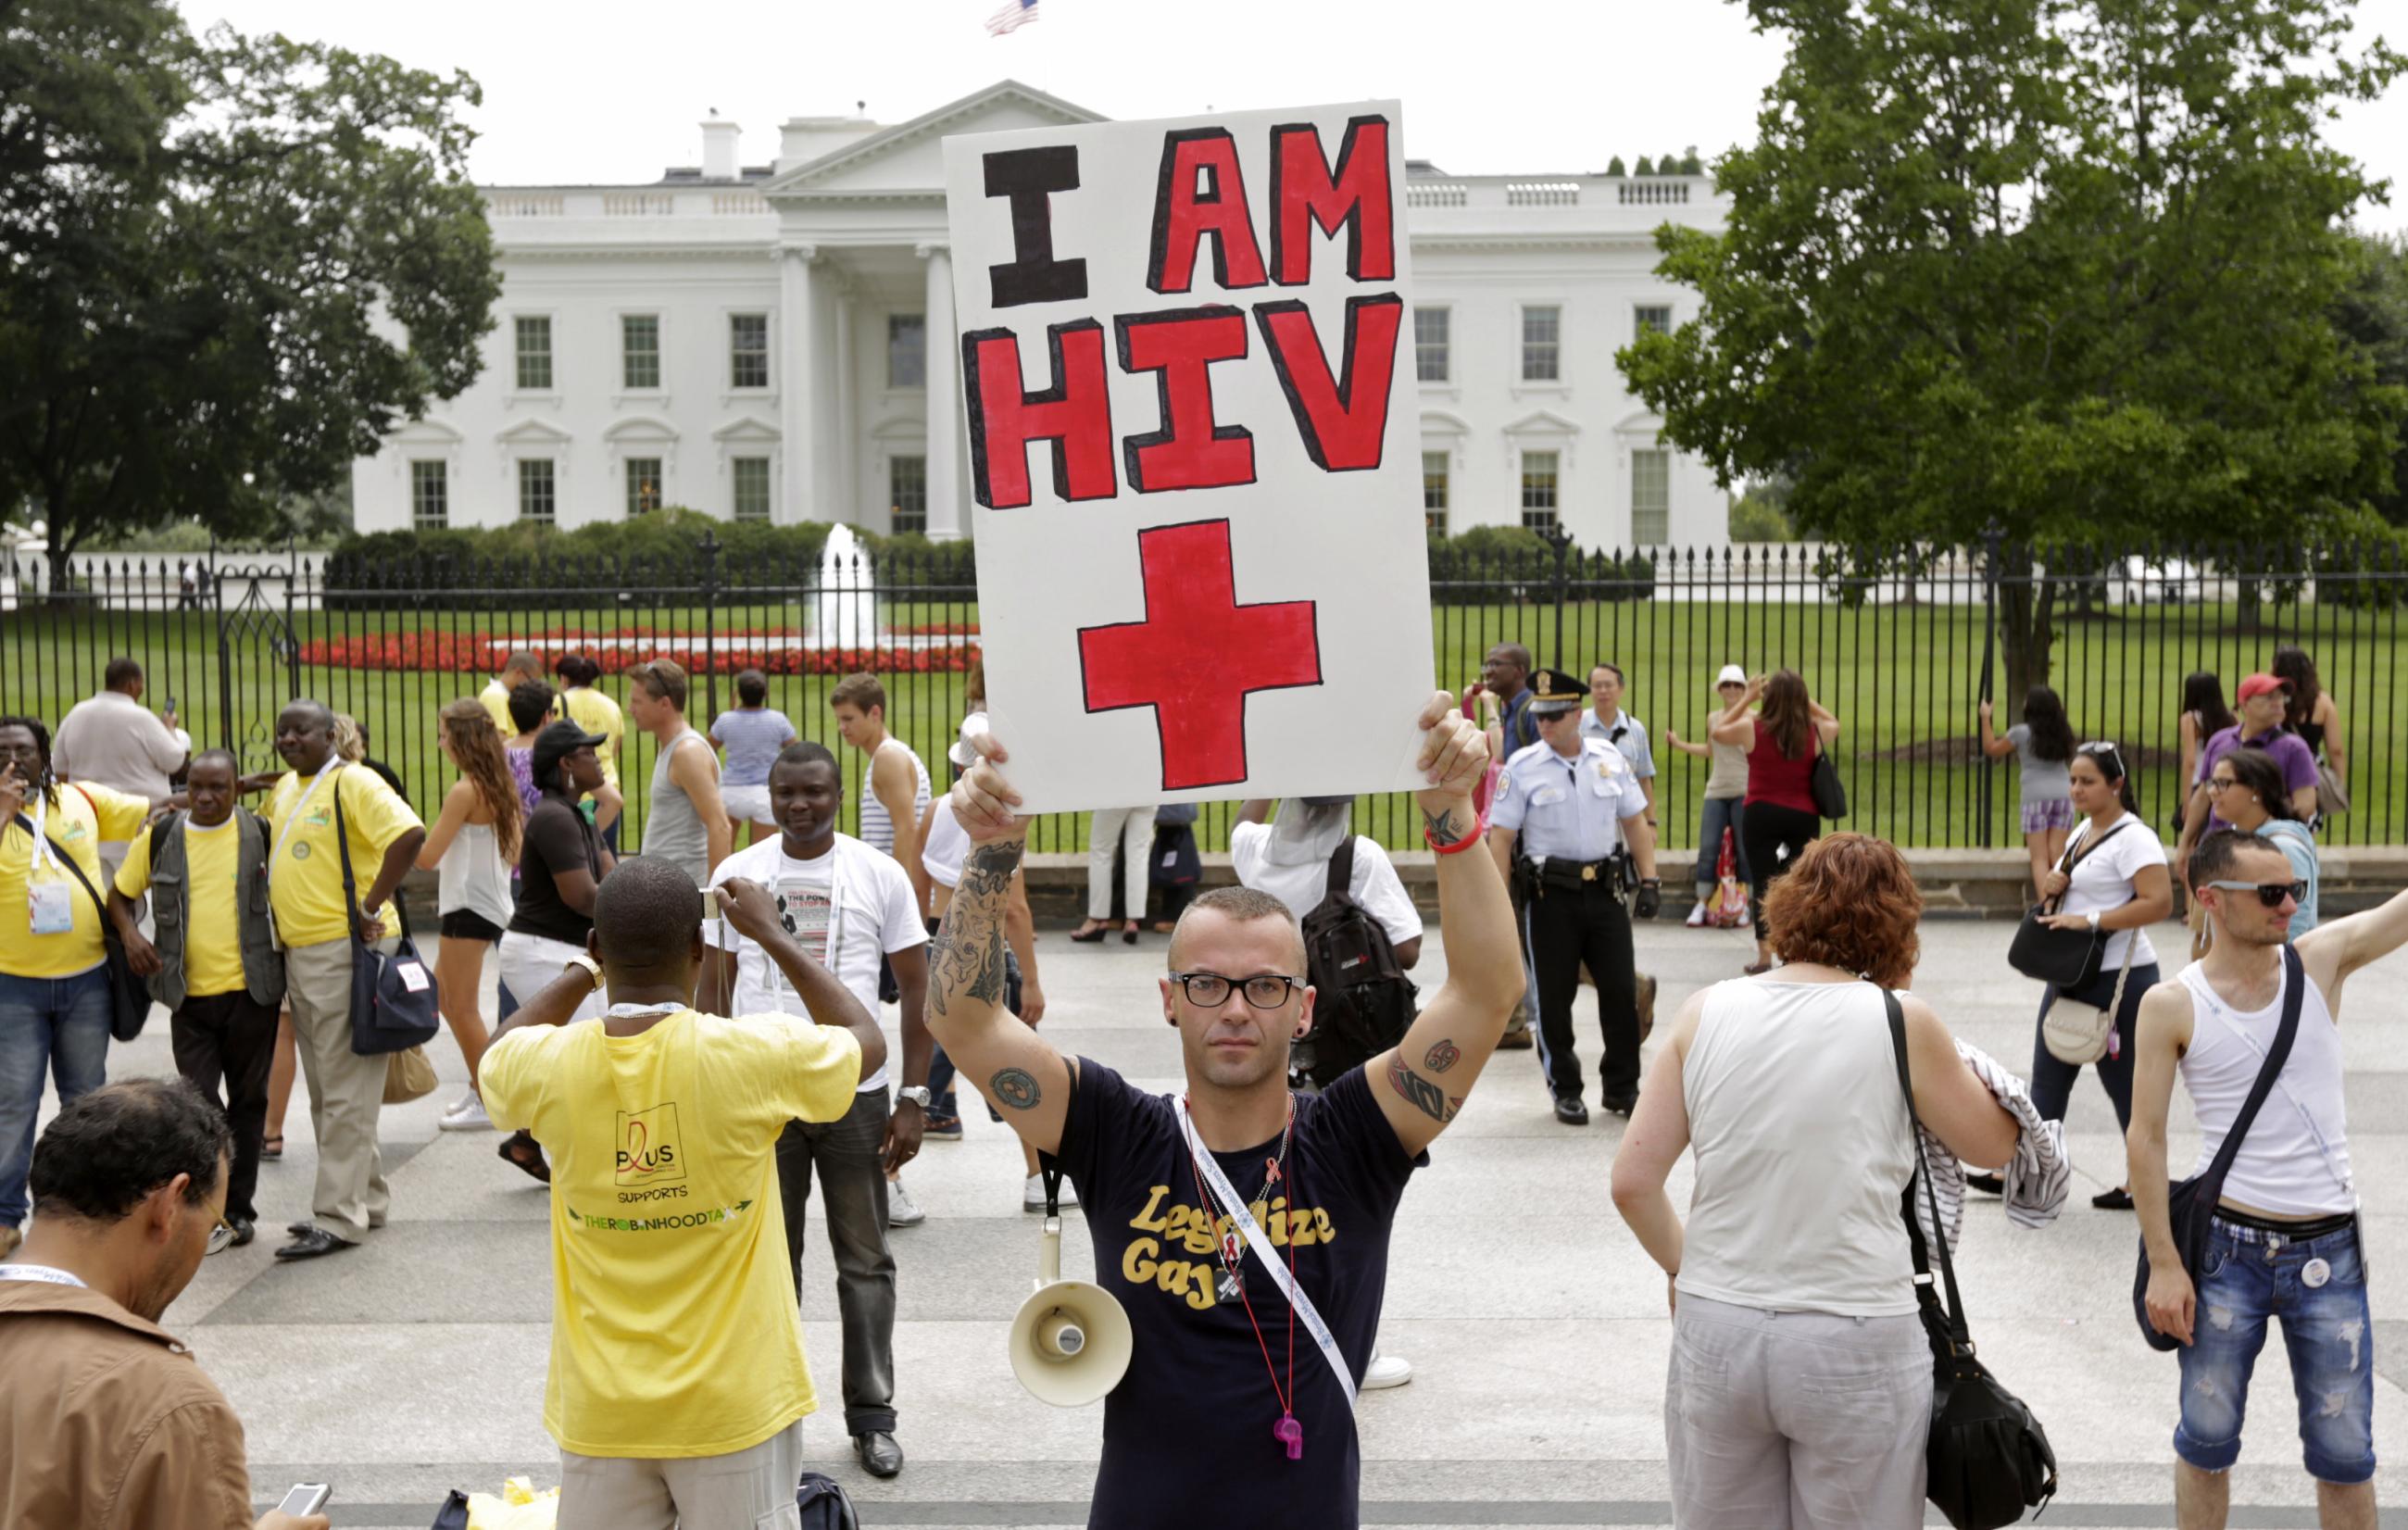 A man takes part in a demonstration in front of the White House.